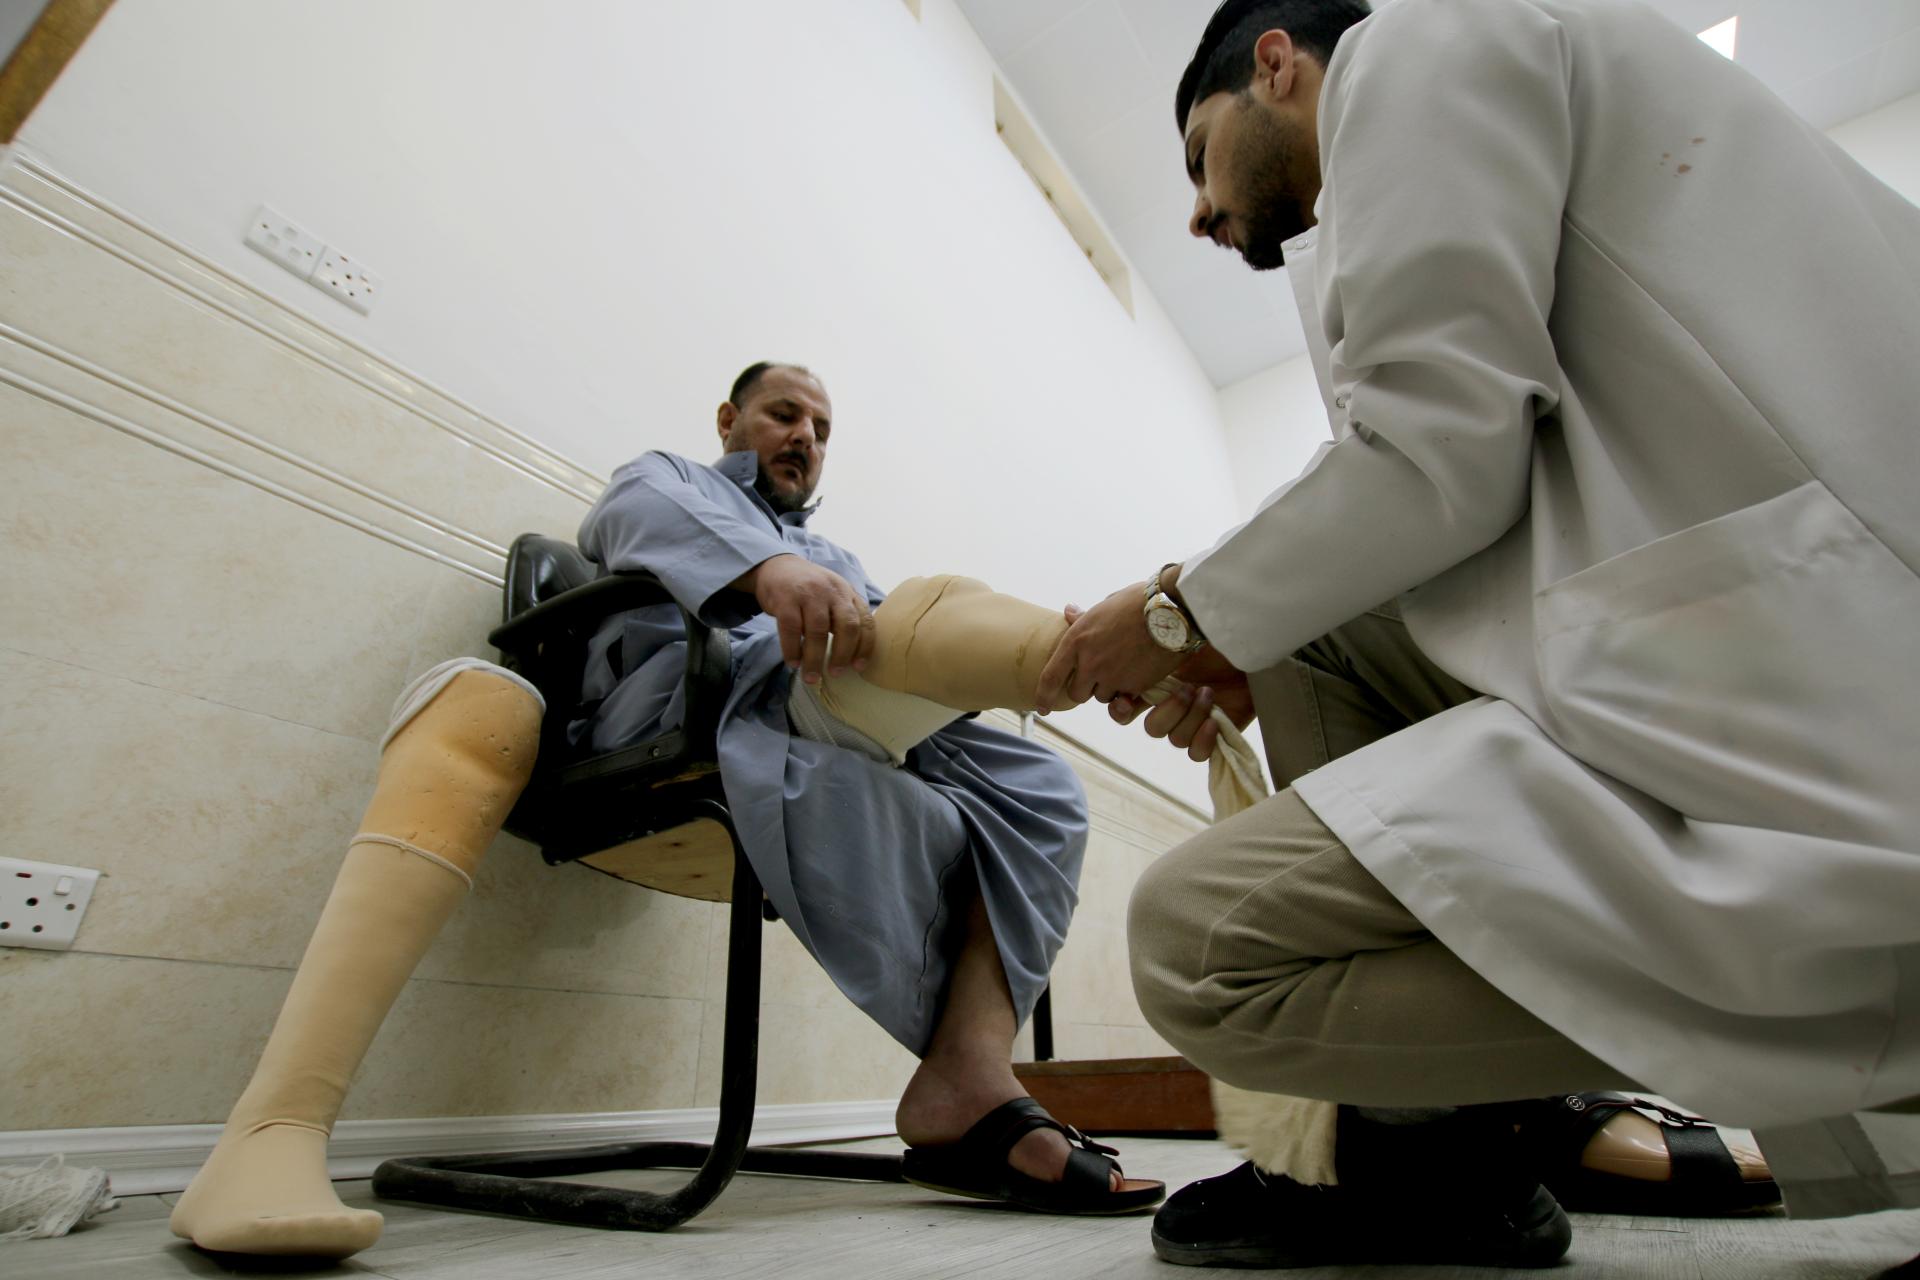 A man getting a prosthetic leg put into place